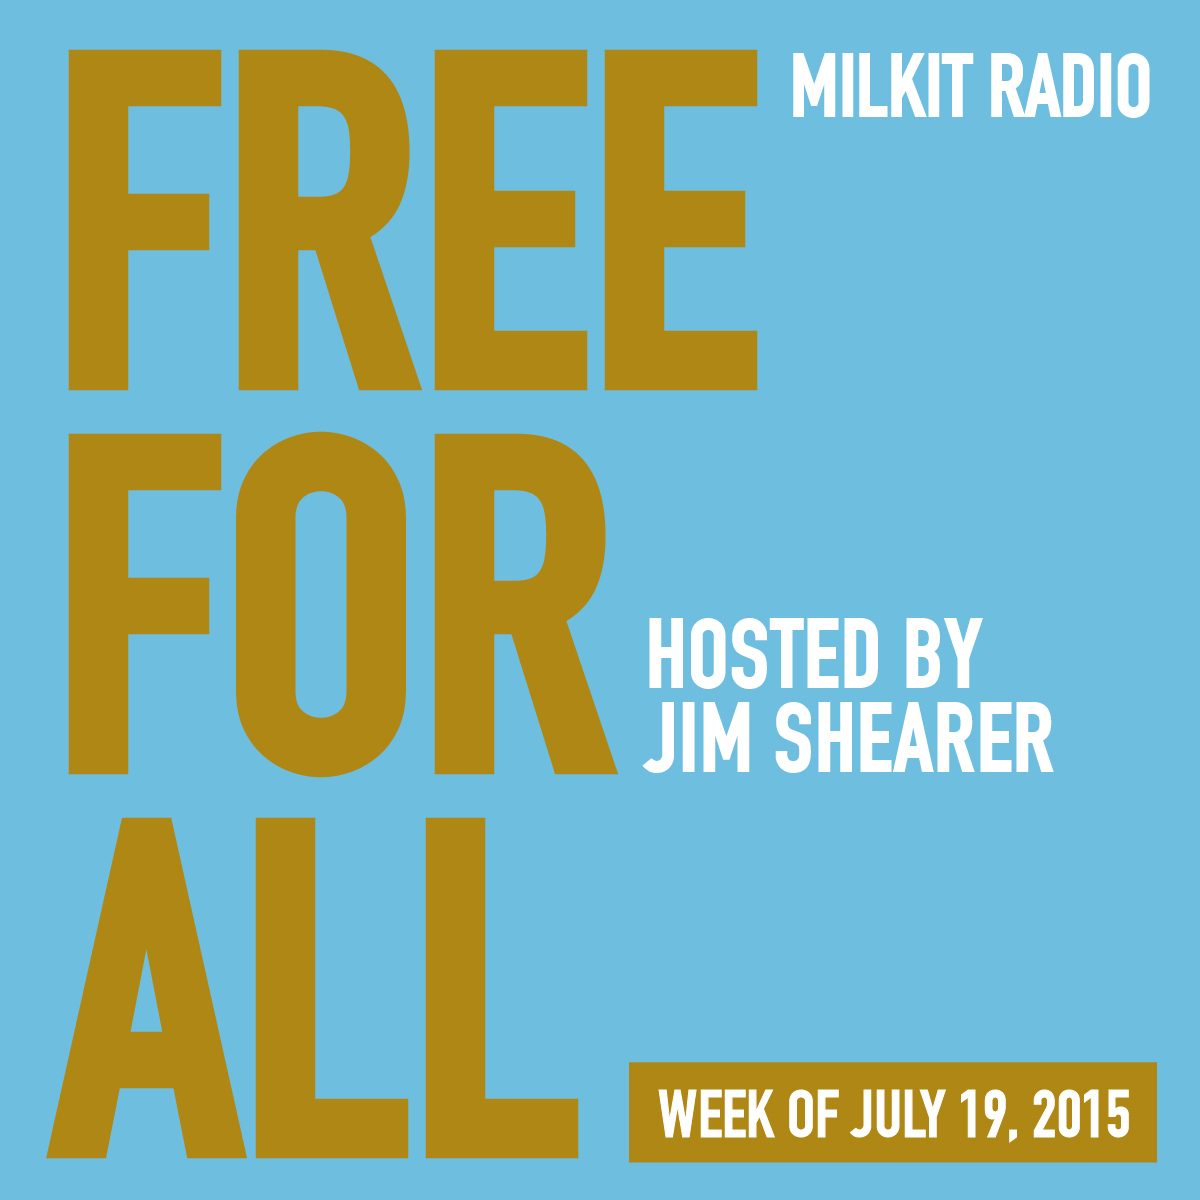 FREE FOR ALL (Milkit Radio) July 19, 2015